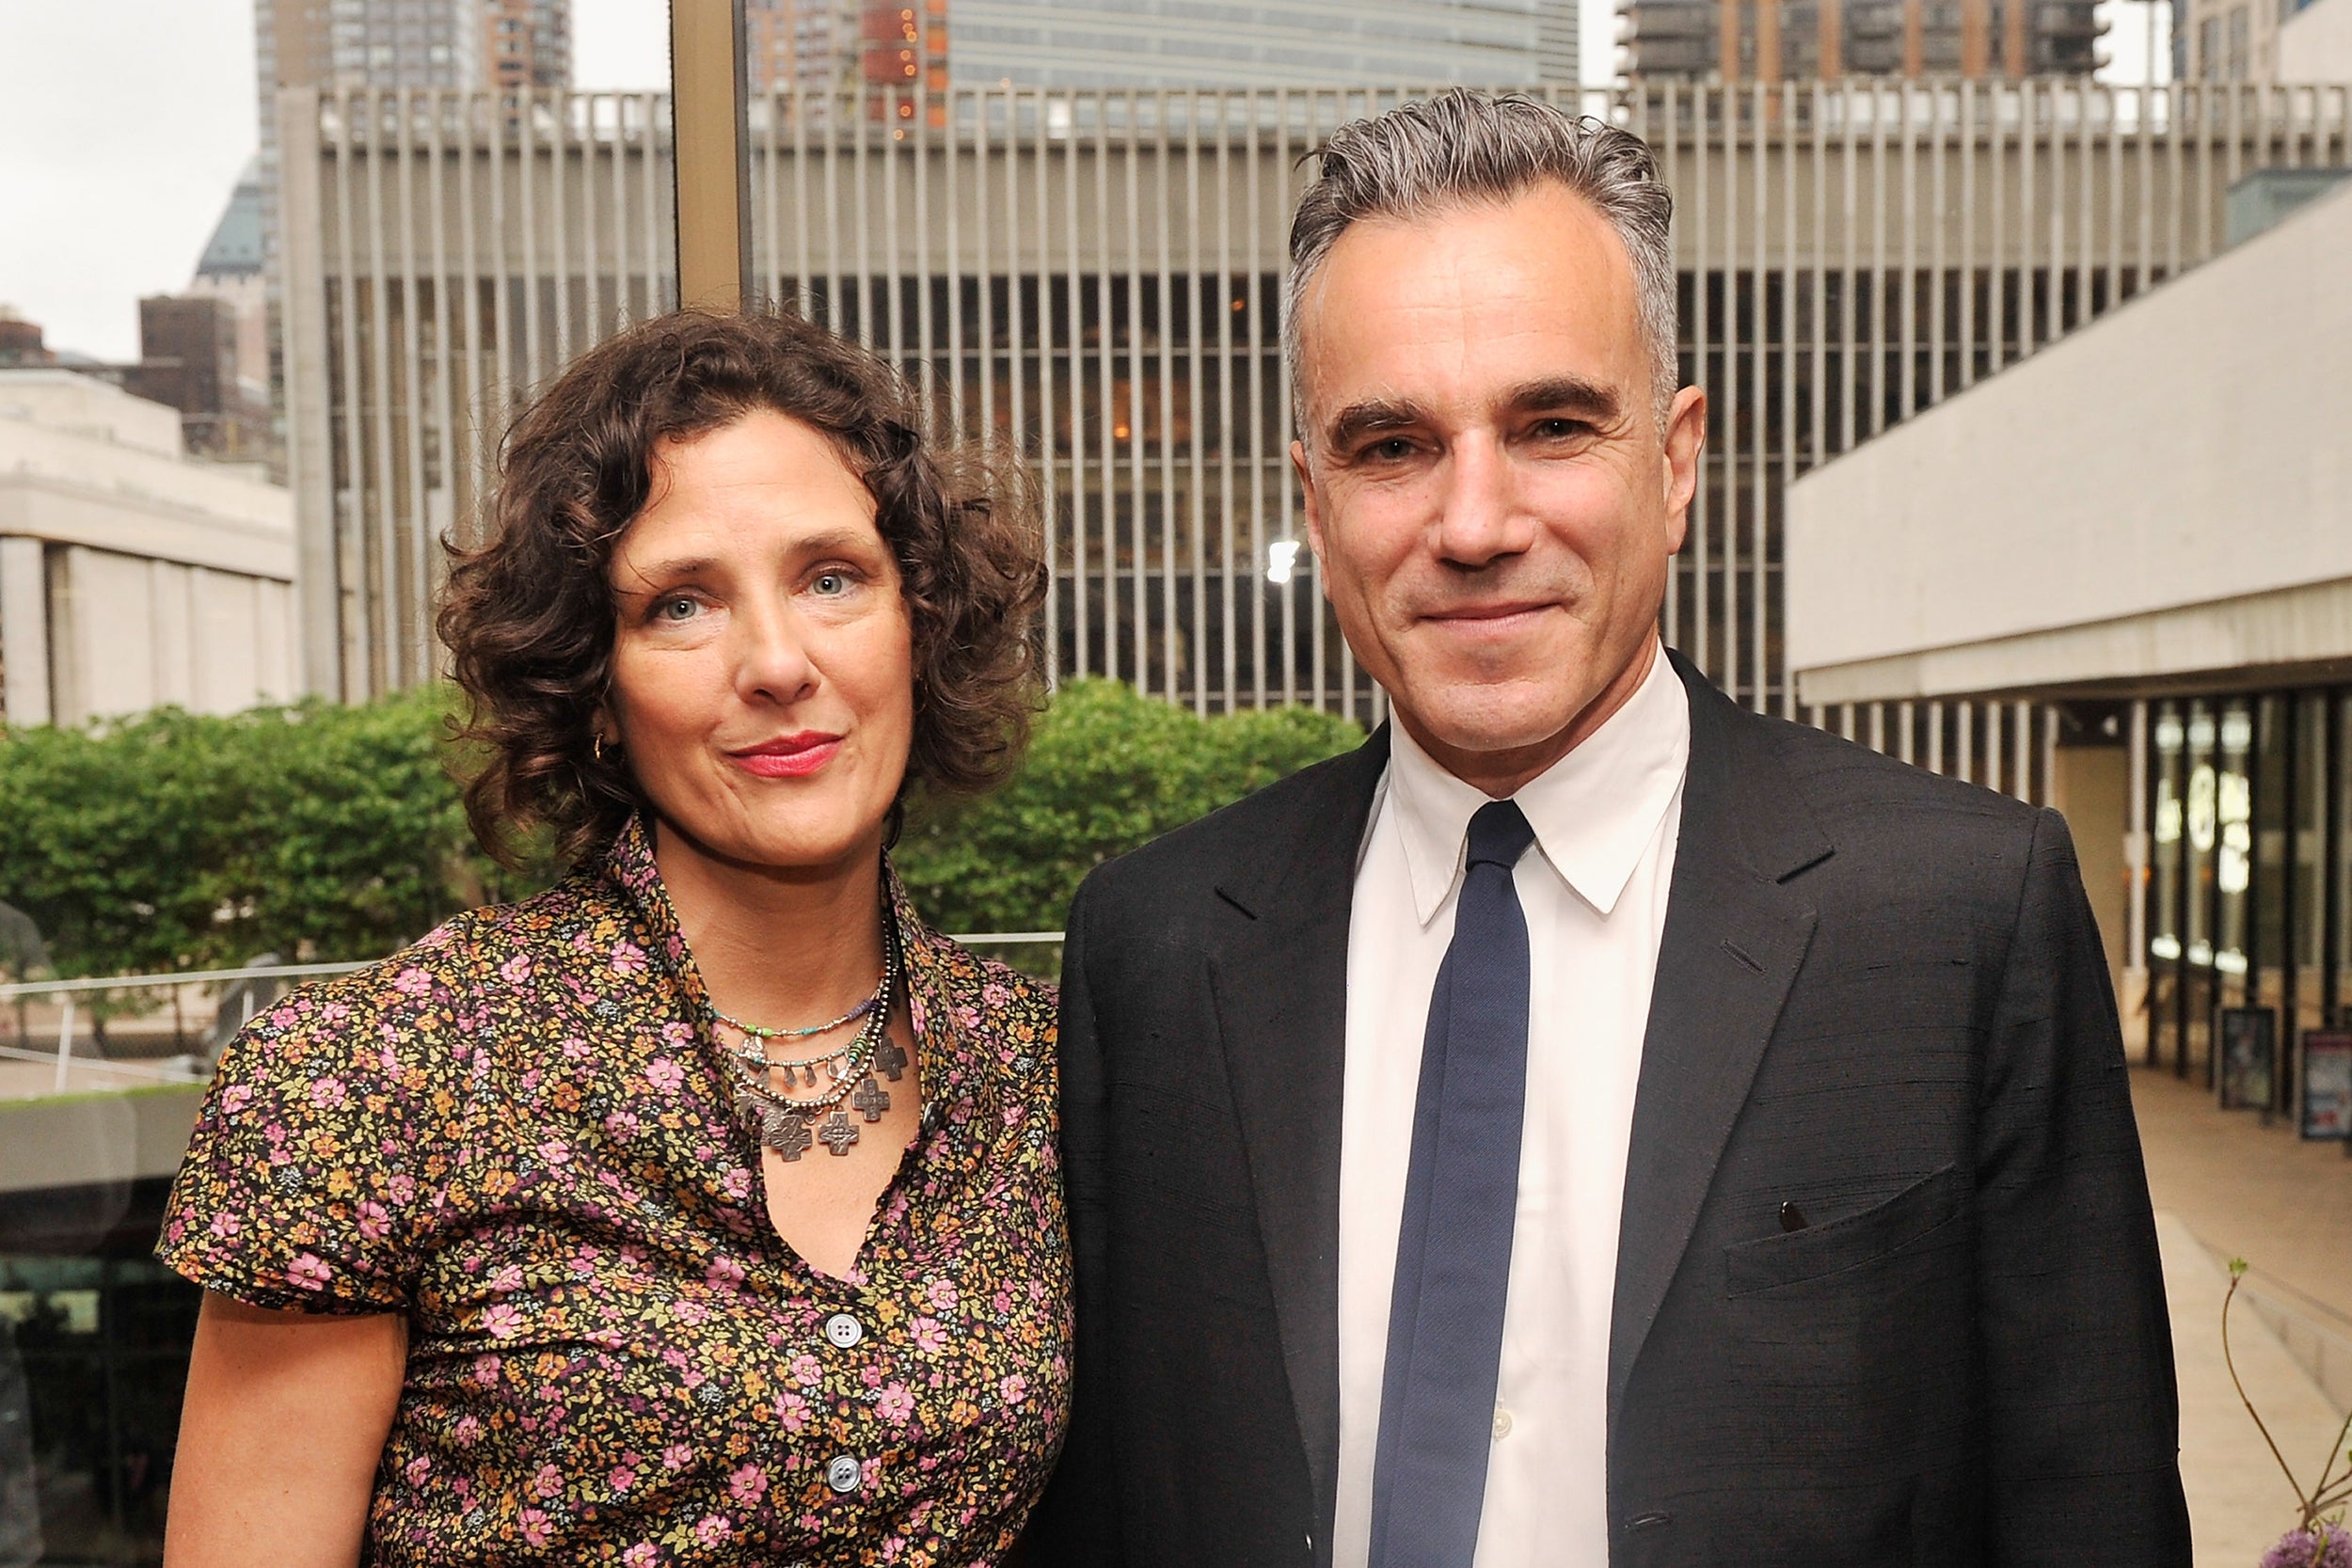 Rebecca Miller’s husband Daniel Day-Lewis, she says, ‘breathed fresh life’ into her relationship with her brother